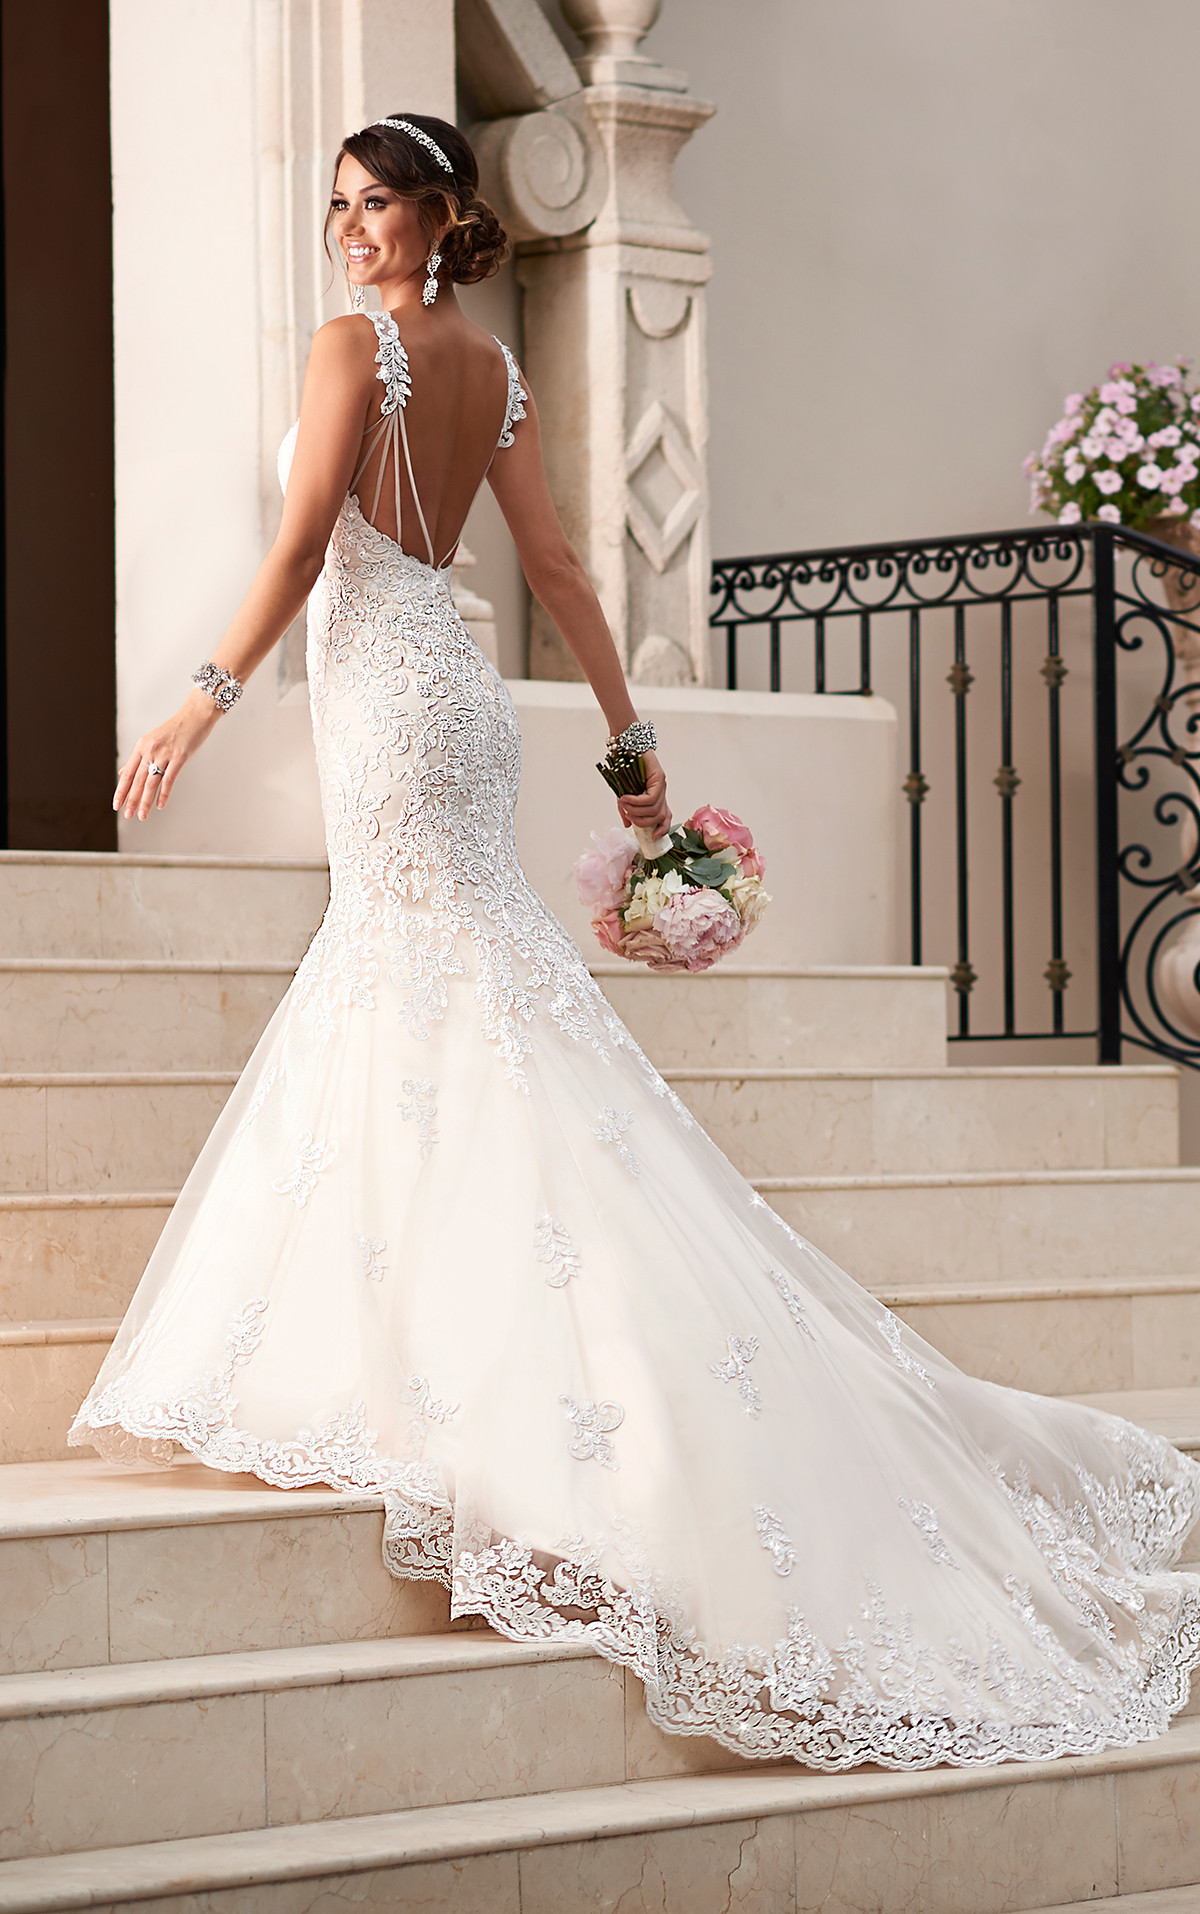 Backless Lace Wedding Dresses
 12 Beautiful Backless Wedding Dresses & Gowns